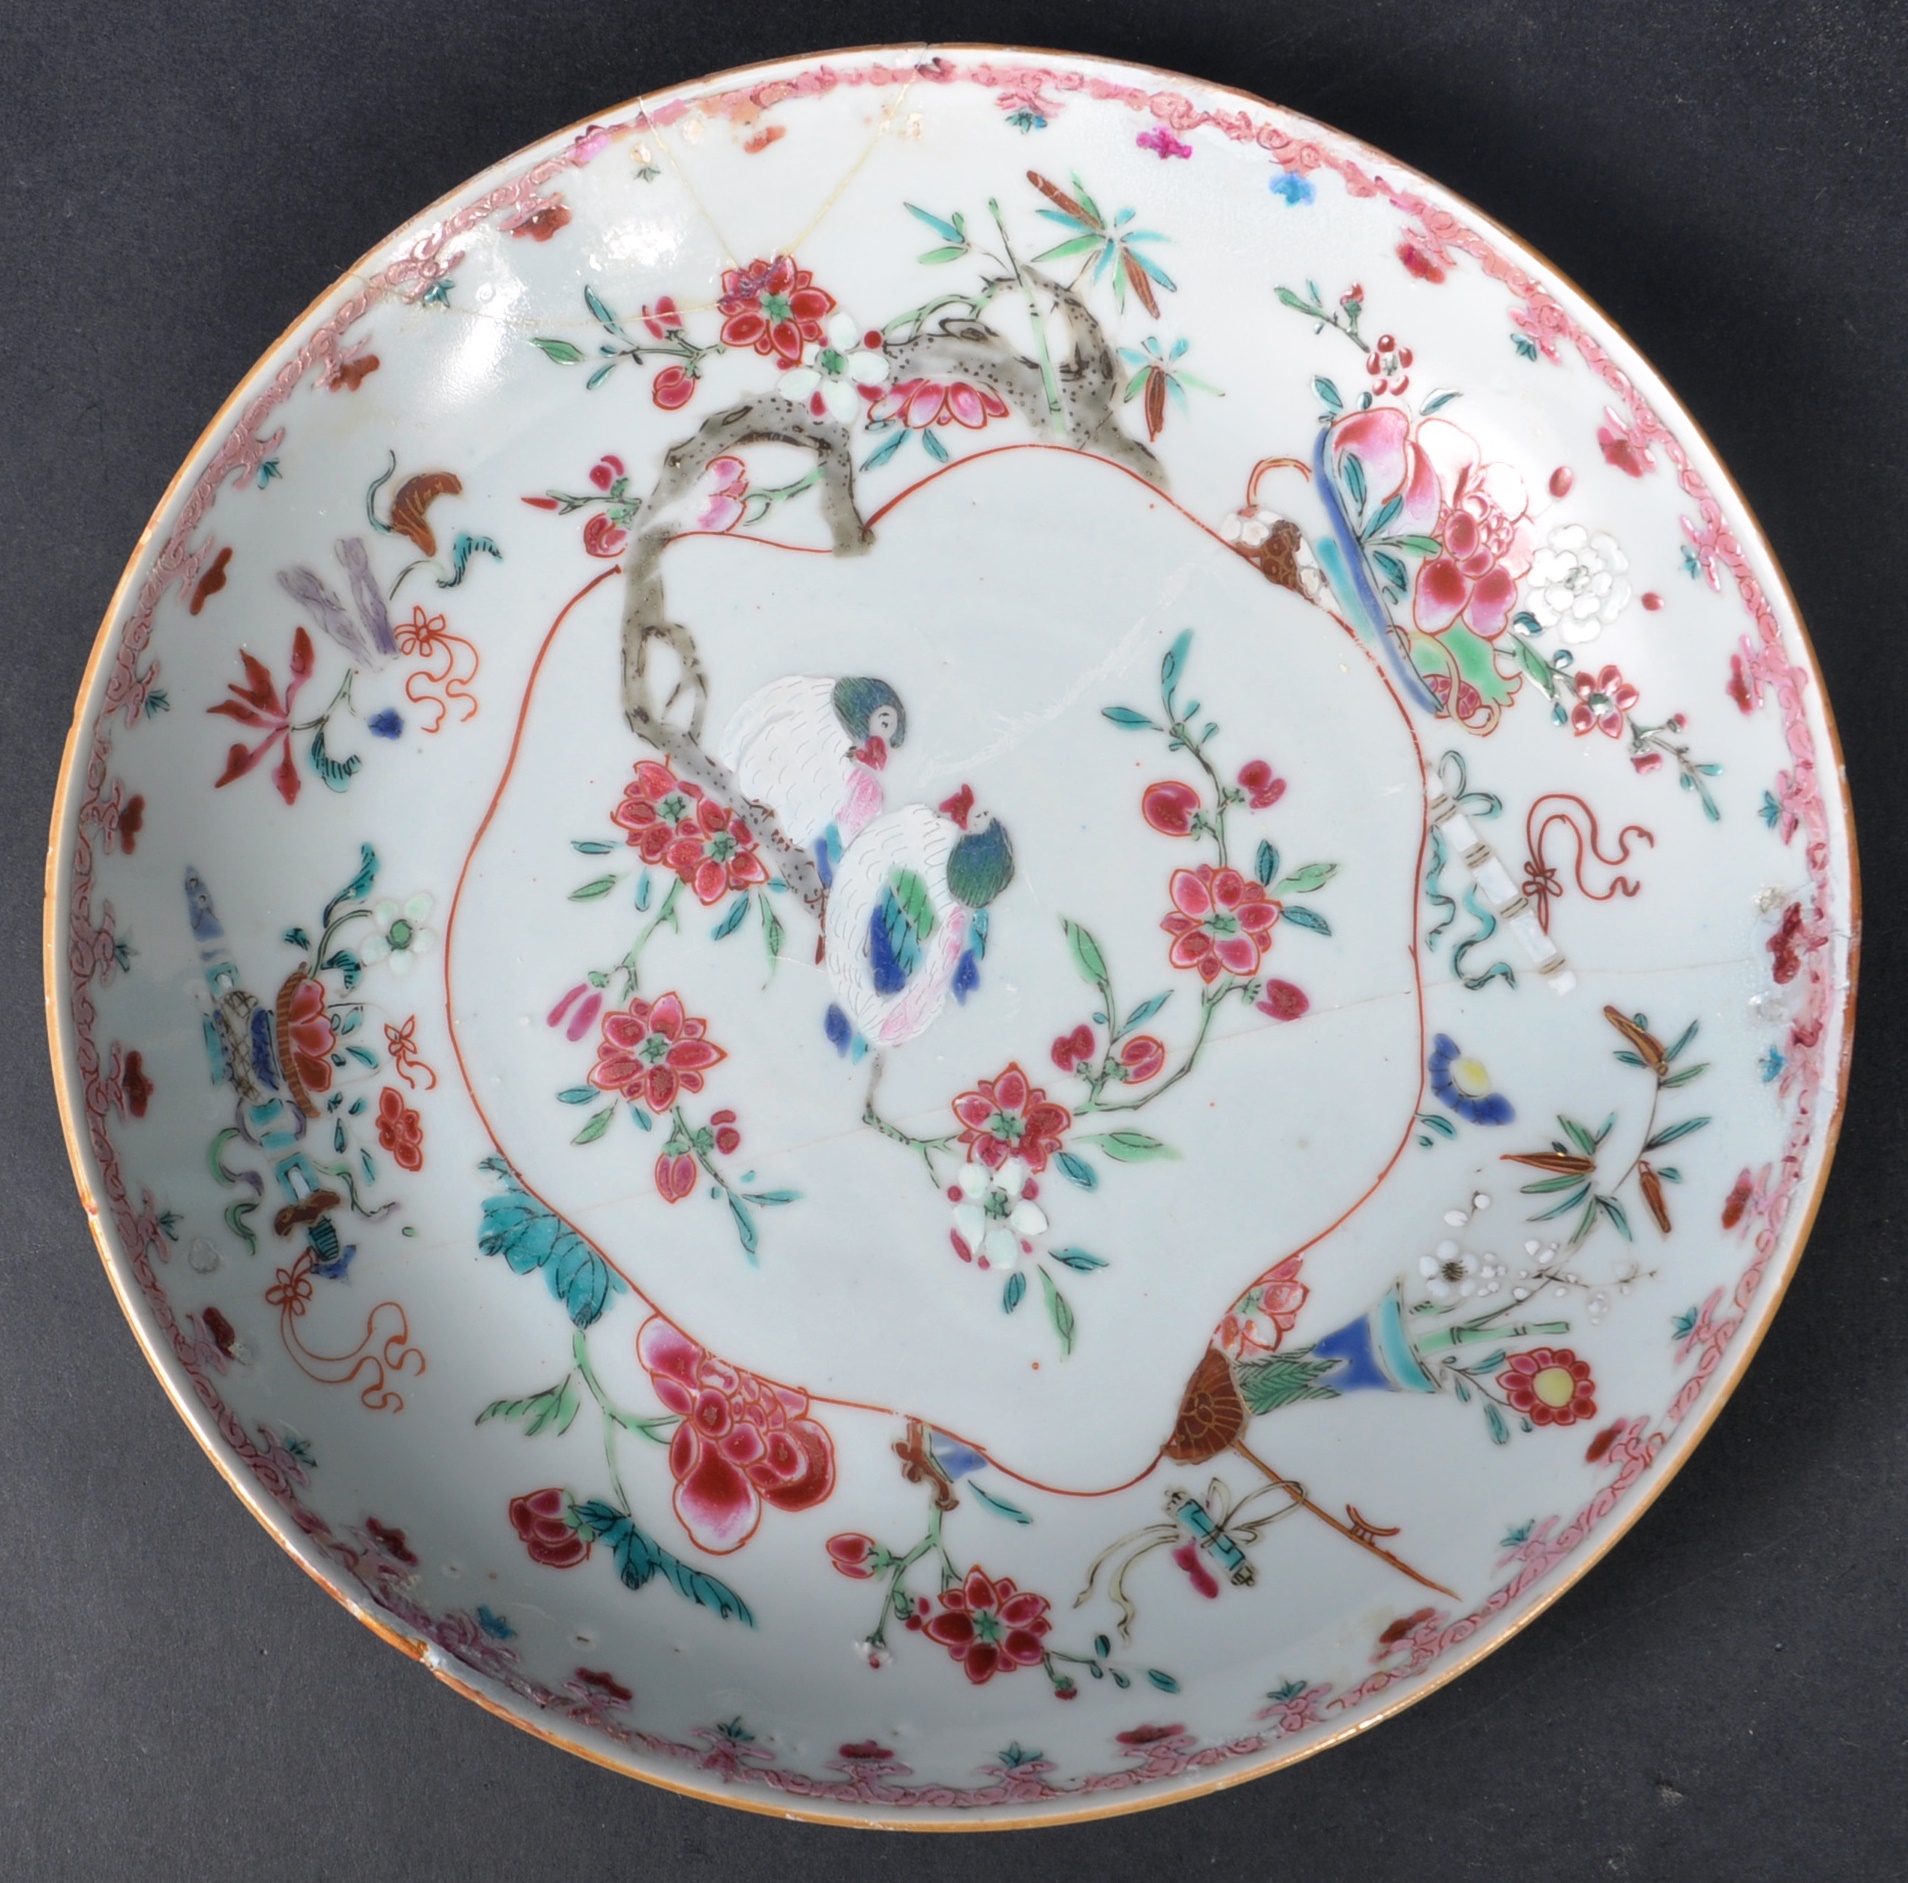 TWO 18TH CENTURY CHINESE QIANLONG PORCELAIN PLATES - Image 5 of 11